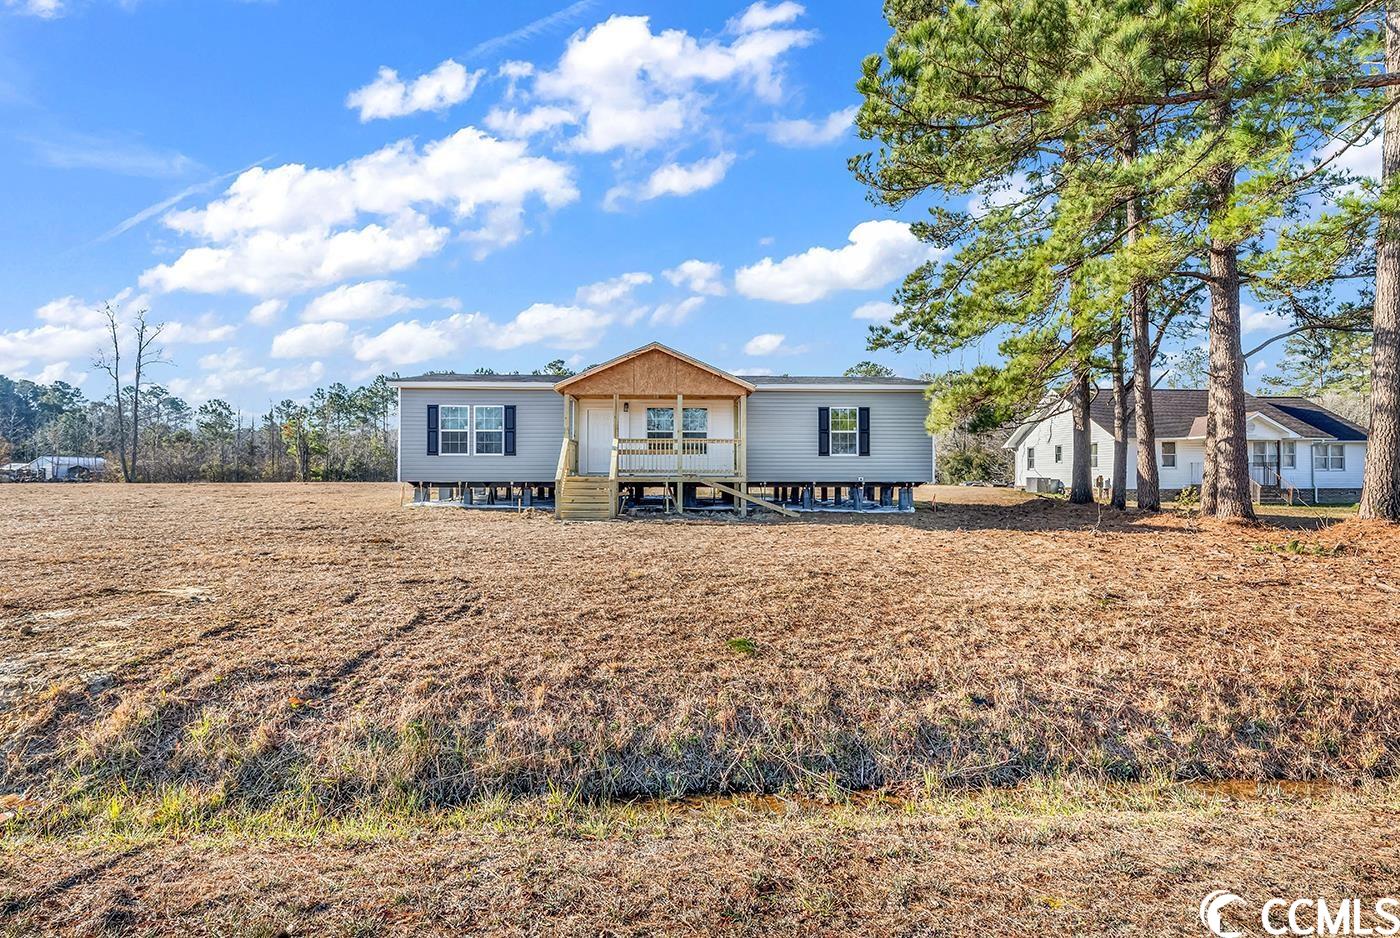 Lot 8 Kerl Rd. Conway, SC 29526